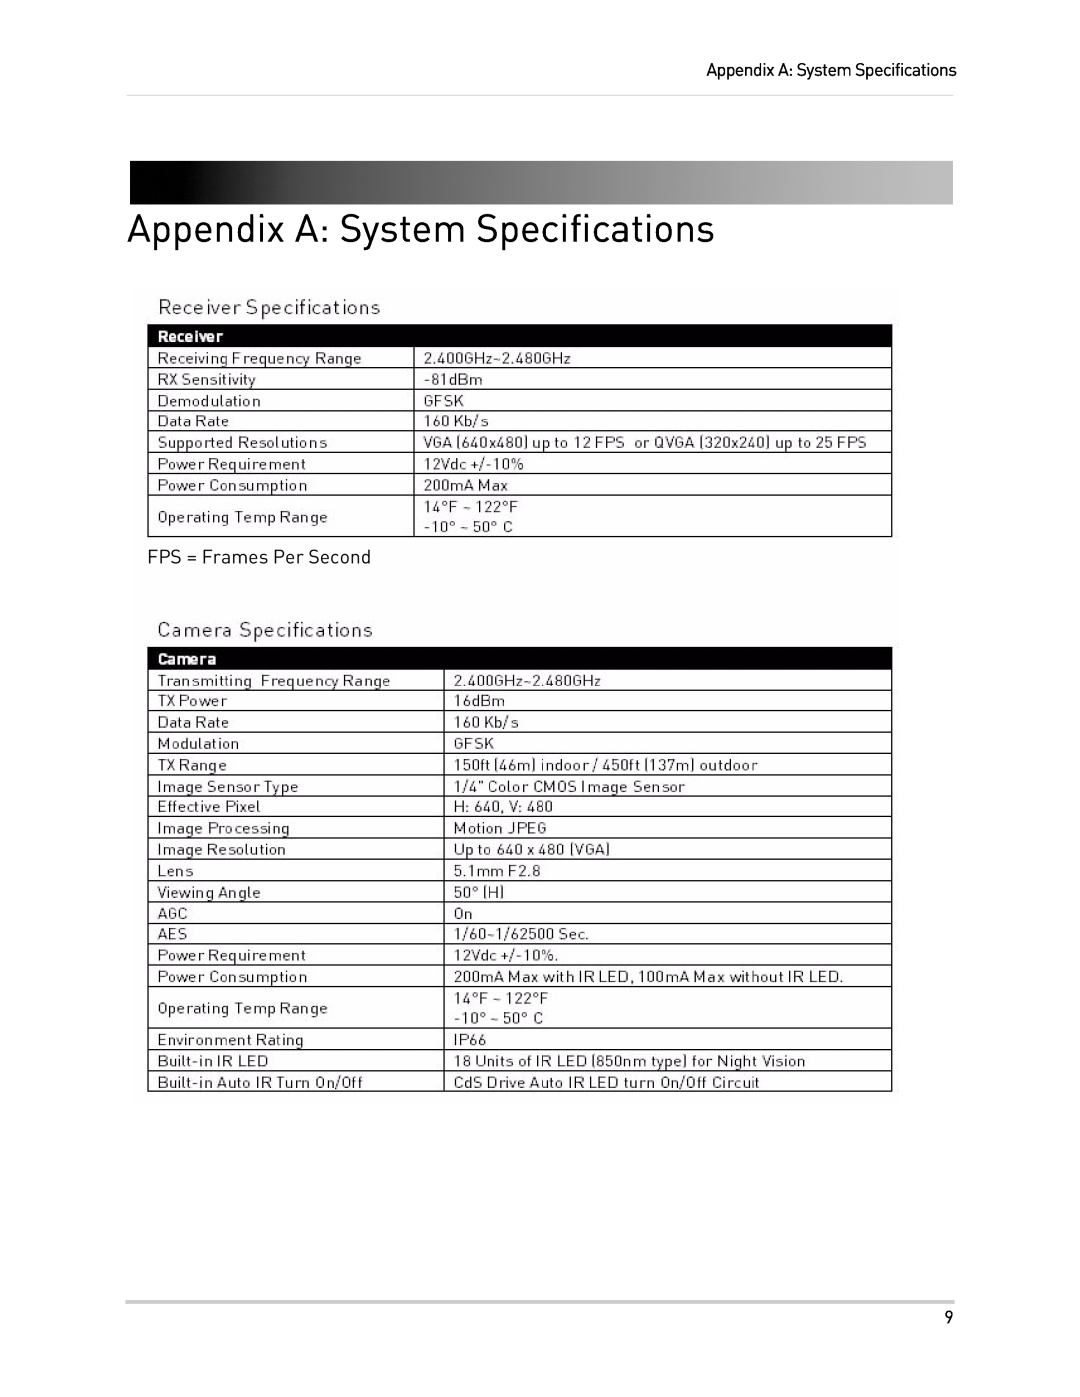 LOREX Technology LW2110 instruction manual Appendix A System Specifications, FPS = Frames Per Second 